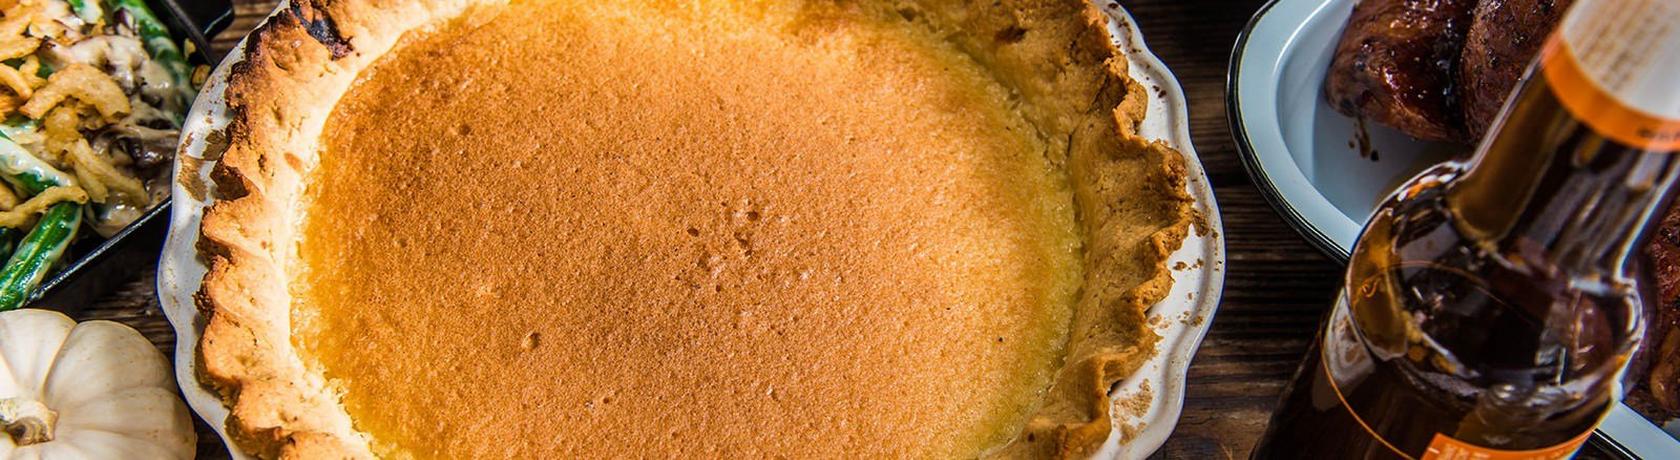 Baked Buttermilk Pie with Cornmeal Crust